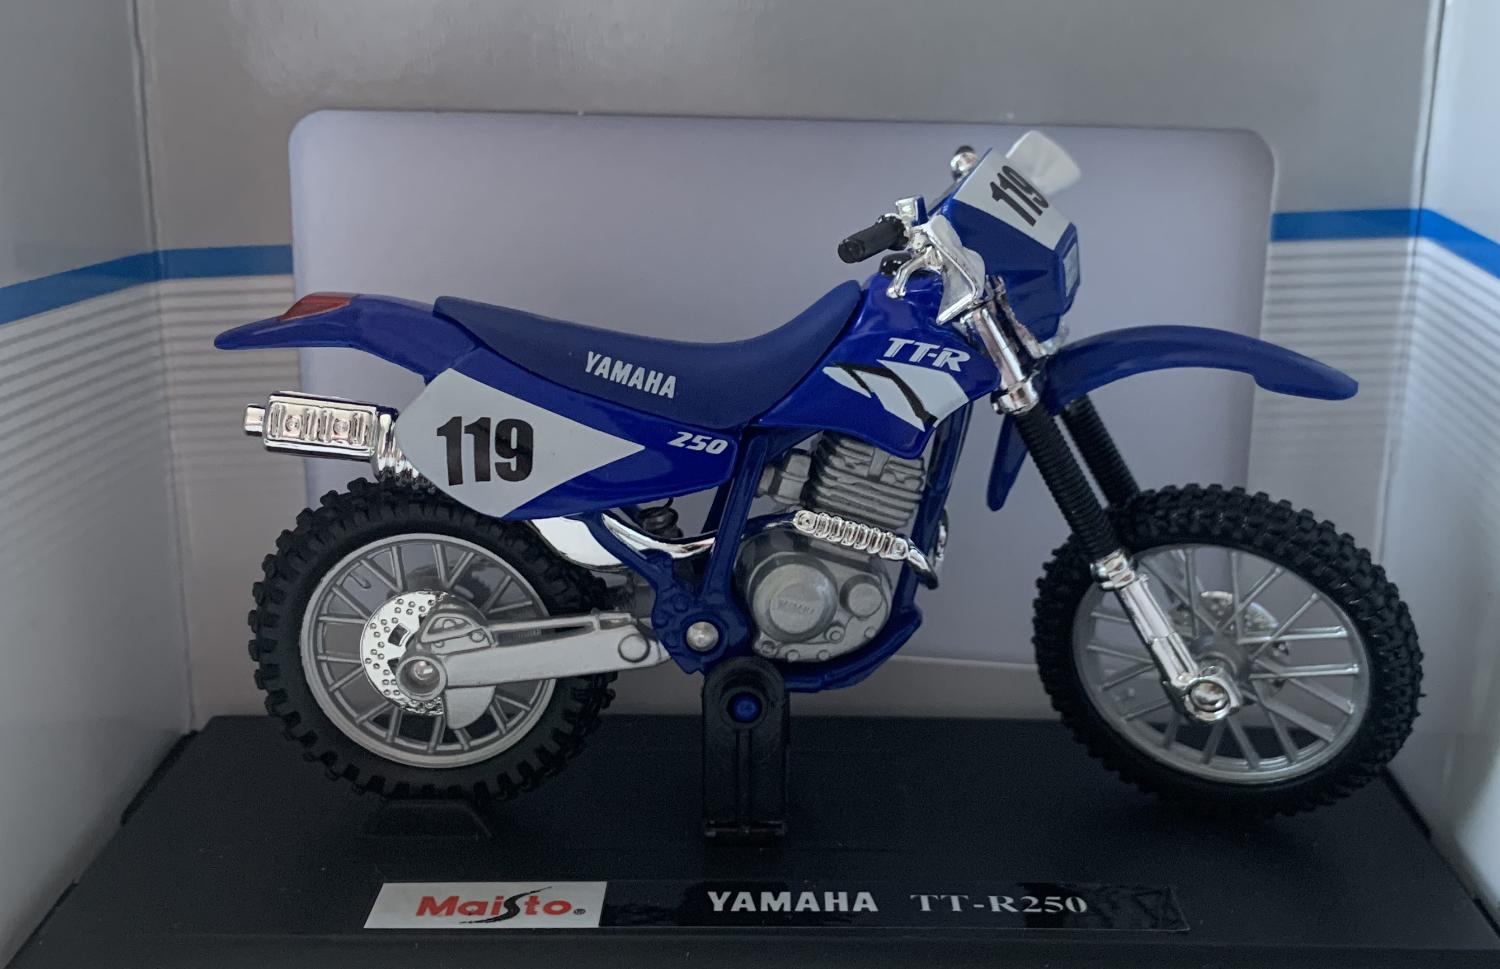 Yamaha TT-R250 in blue 1:18 scale from Maisto